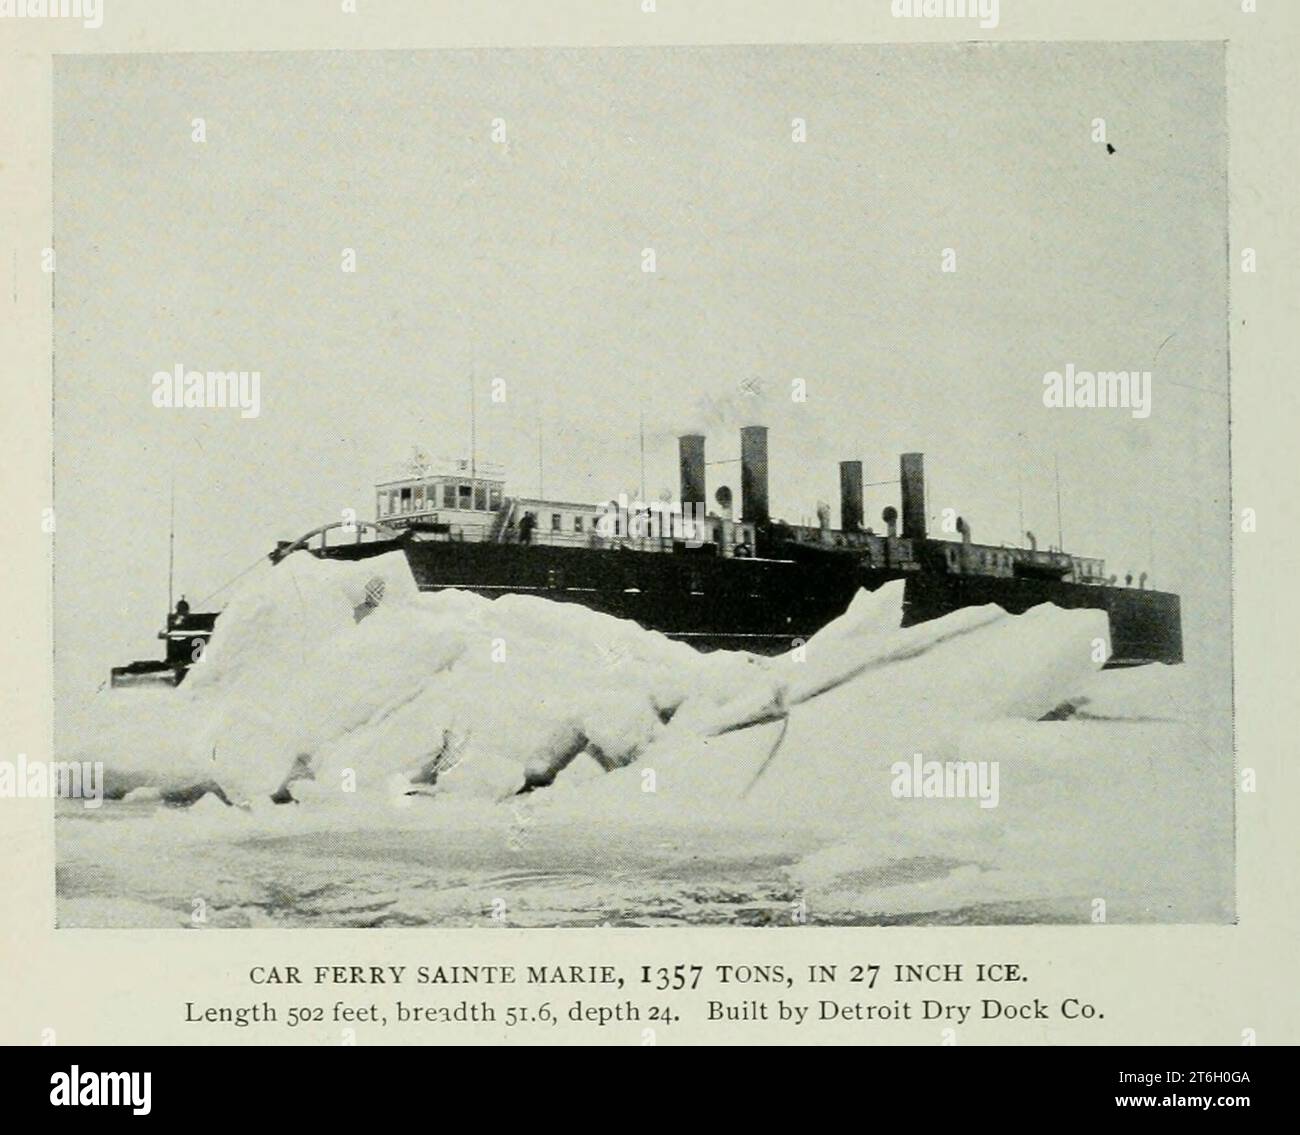 CAR FERRY SAINTE. MARIE, I357 TONS, IN 27 INCH ICE. Length 502 feet, breidth 51.6, depth 24. Built by Detroit Dry Dock Co. from the Article PROGRESS AND PROMISE IN AMERICAN SHIP-BUILDING. by Lewis Nixon  from The Engineering Magazine DEVOTED TO INDUSTRIAL PROGRESS Volume XII October 1896 to March 1897 The Engineering Magazine Co Stock Photo